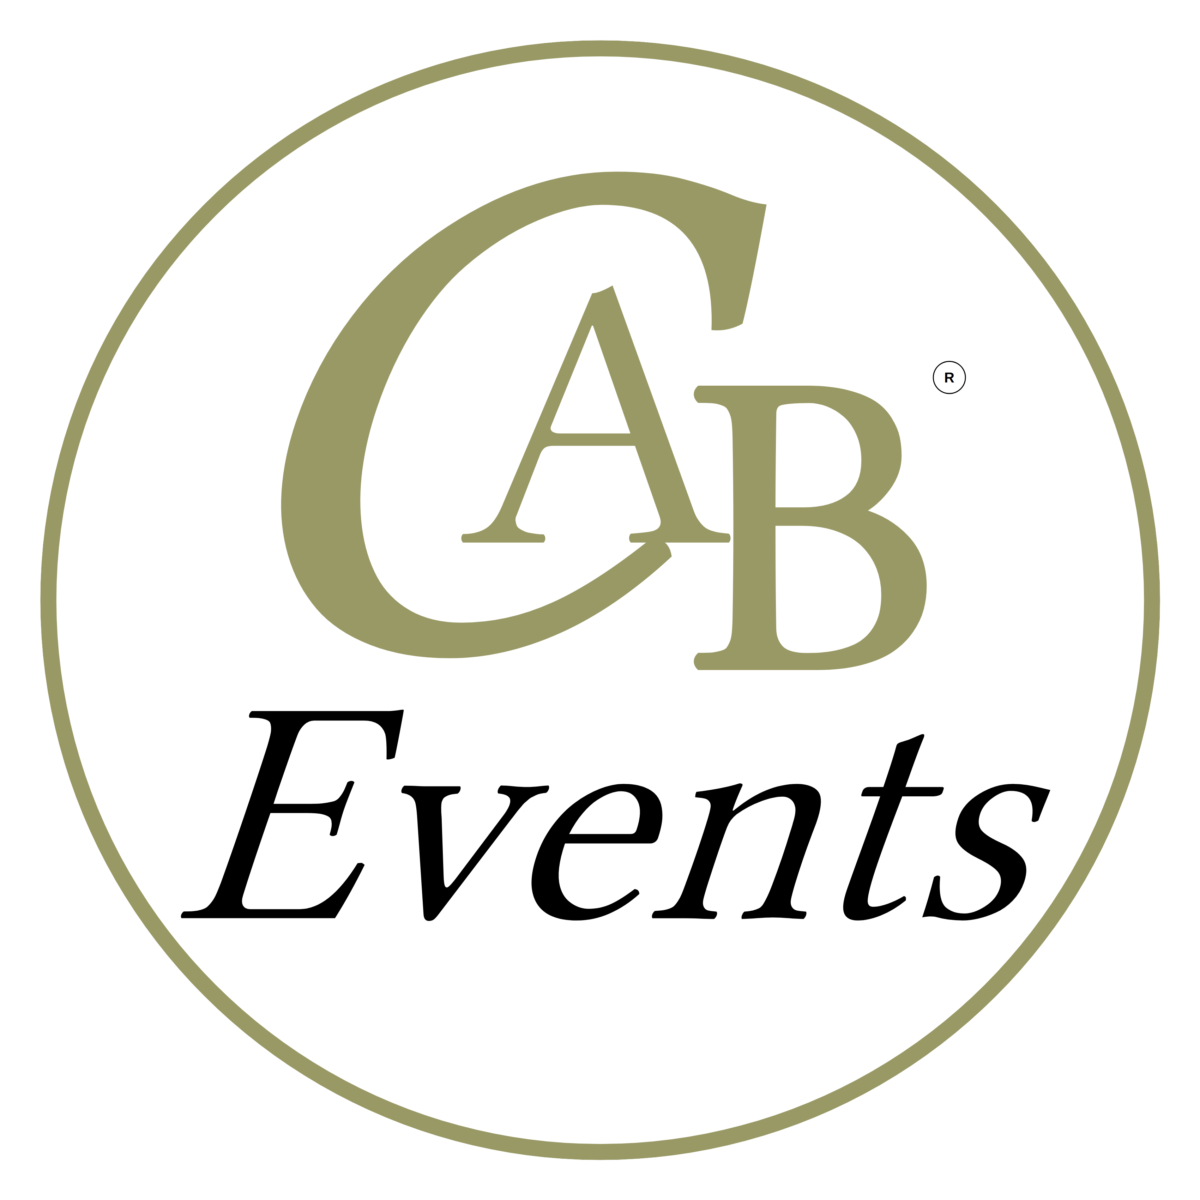 CAB Events